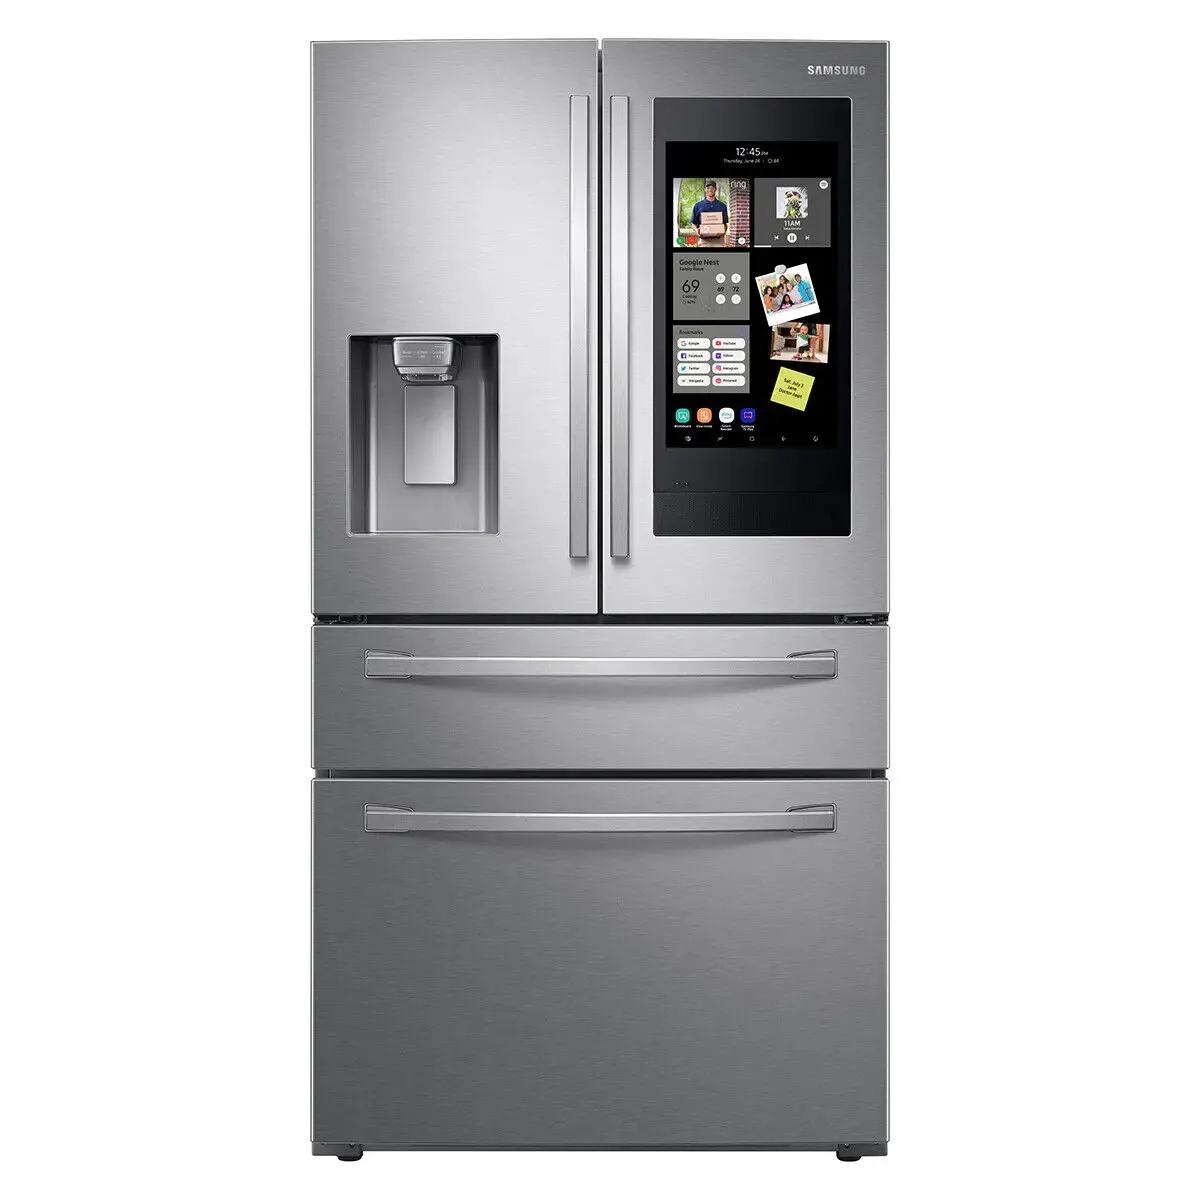 Brand new 28 cu ft 4-Door French Door Refrigerator with 21.5 Touch Screen Family in Stainless Steel